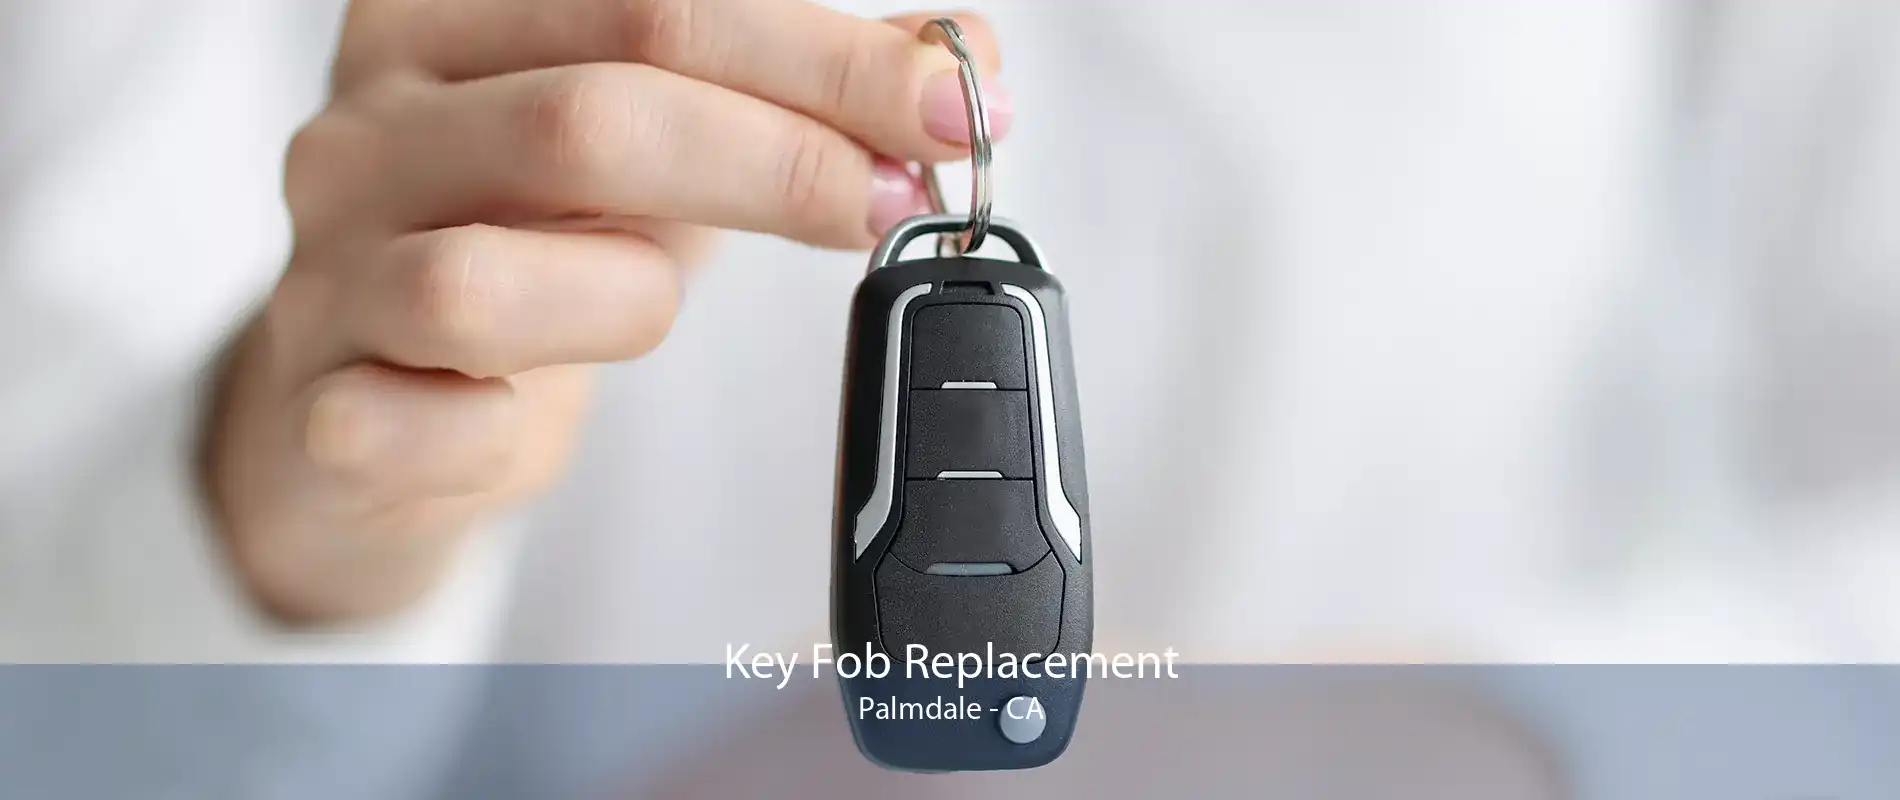 Key Fob Replacement Palmdale - CA